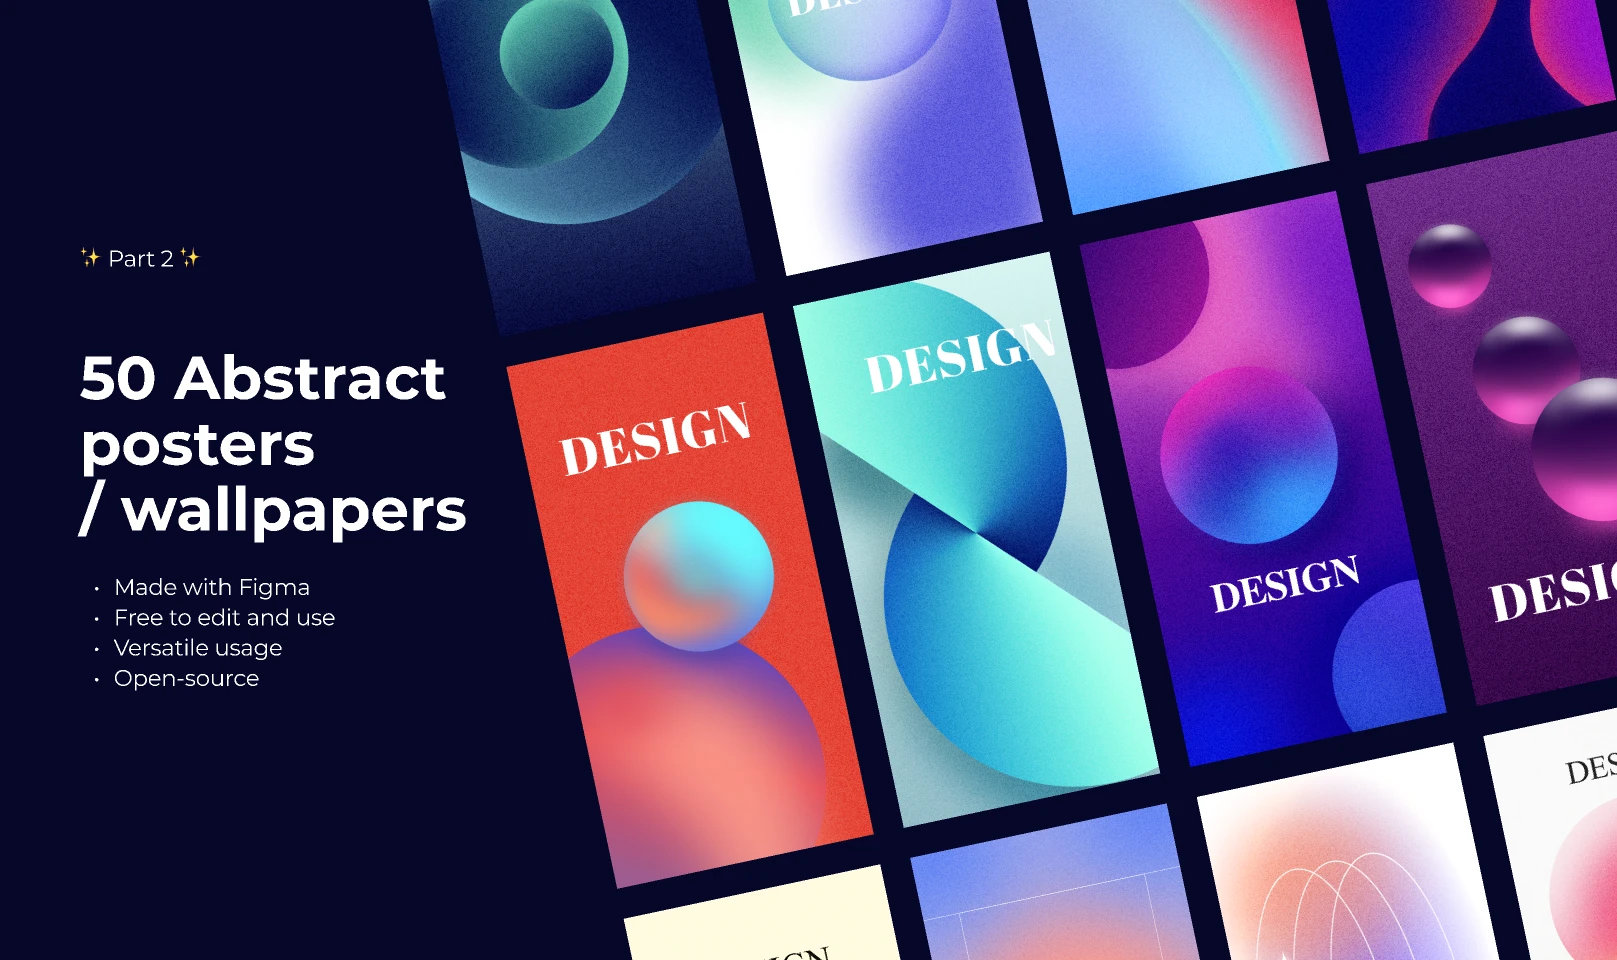 50 Abstract posters/wallpapers (Part 2) for Figma and Adobe XD